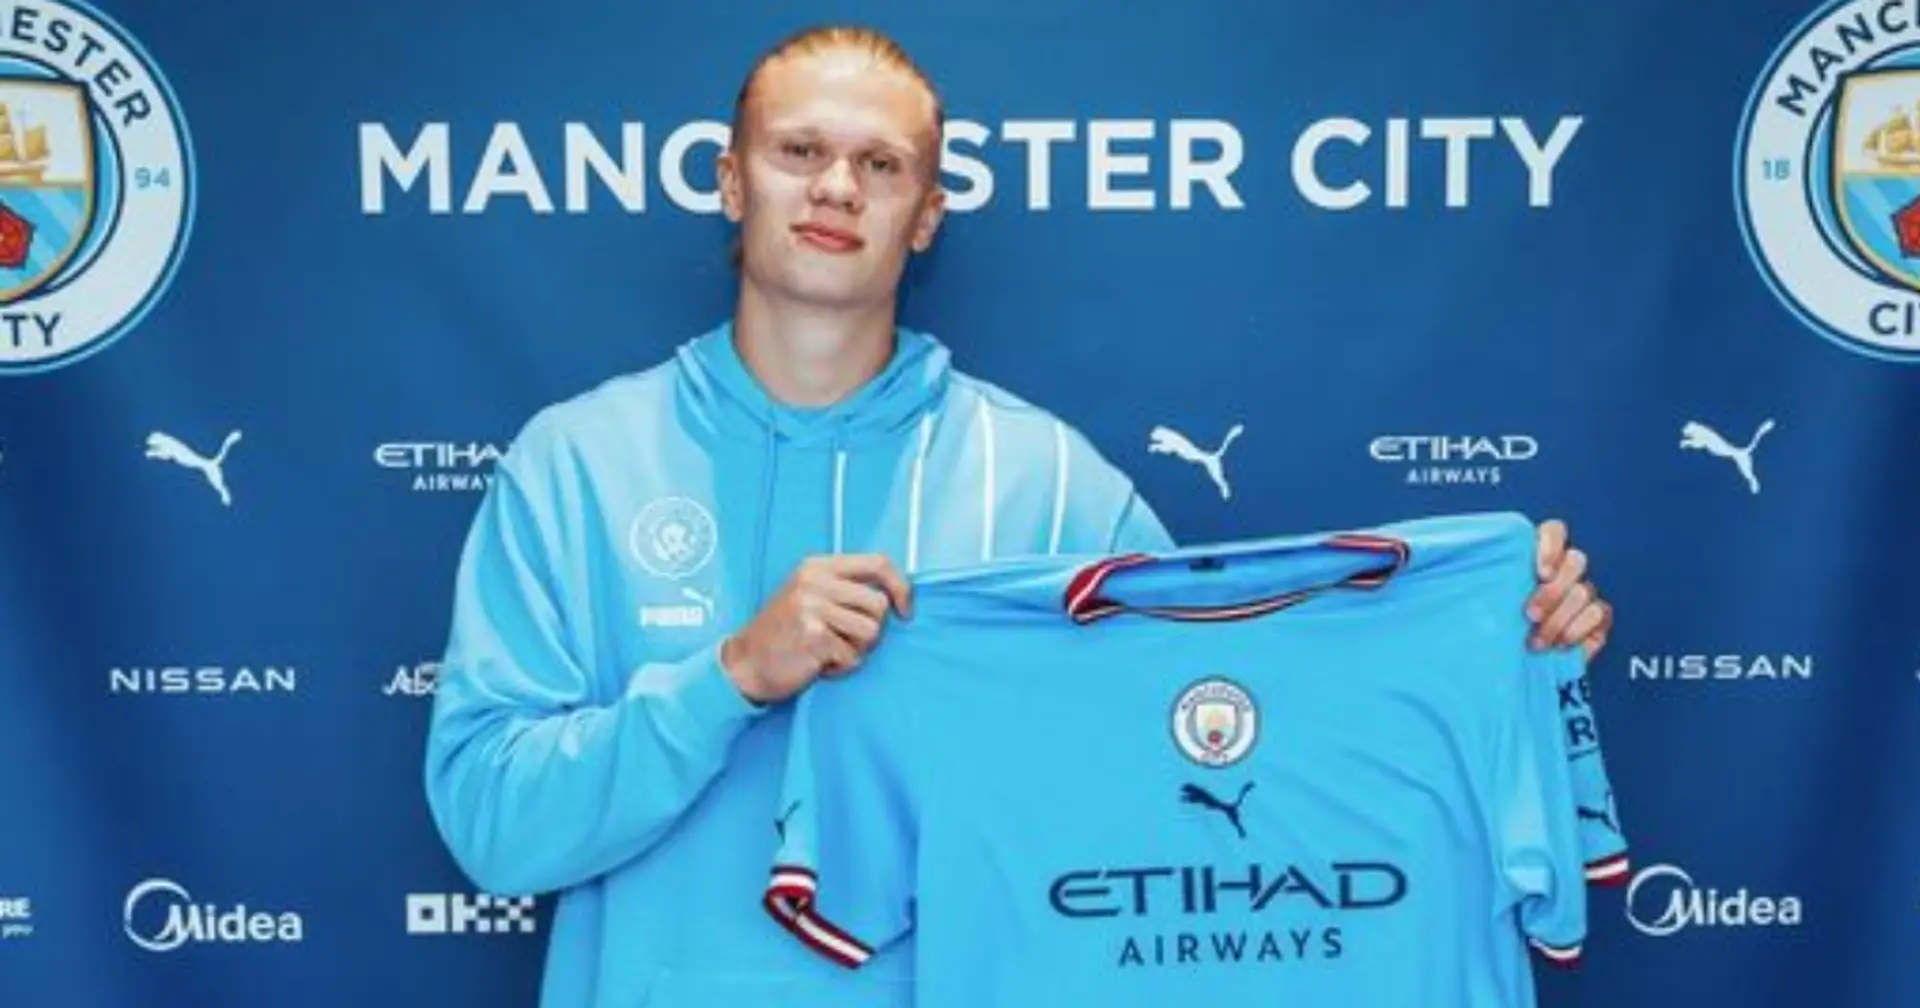 Man City unveil Erling Haaland as new player — Man United fans only have one thing to say